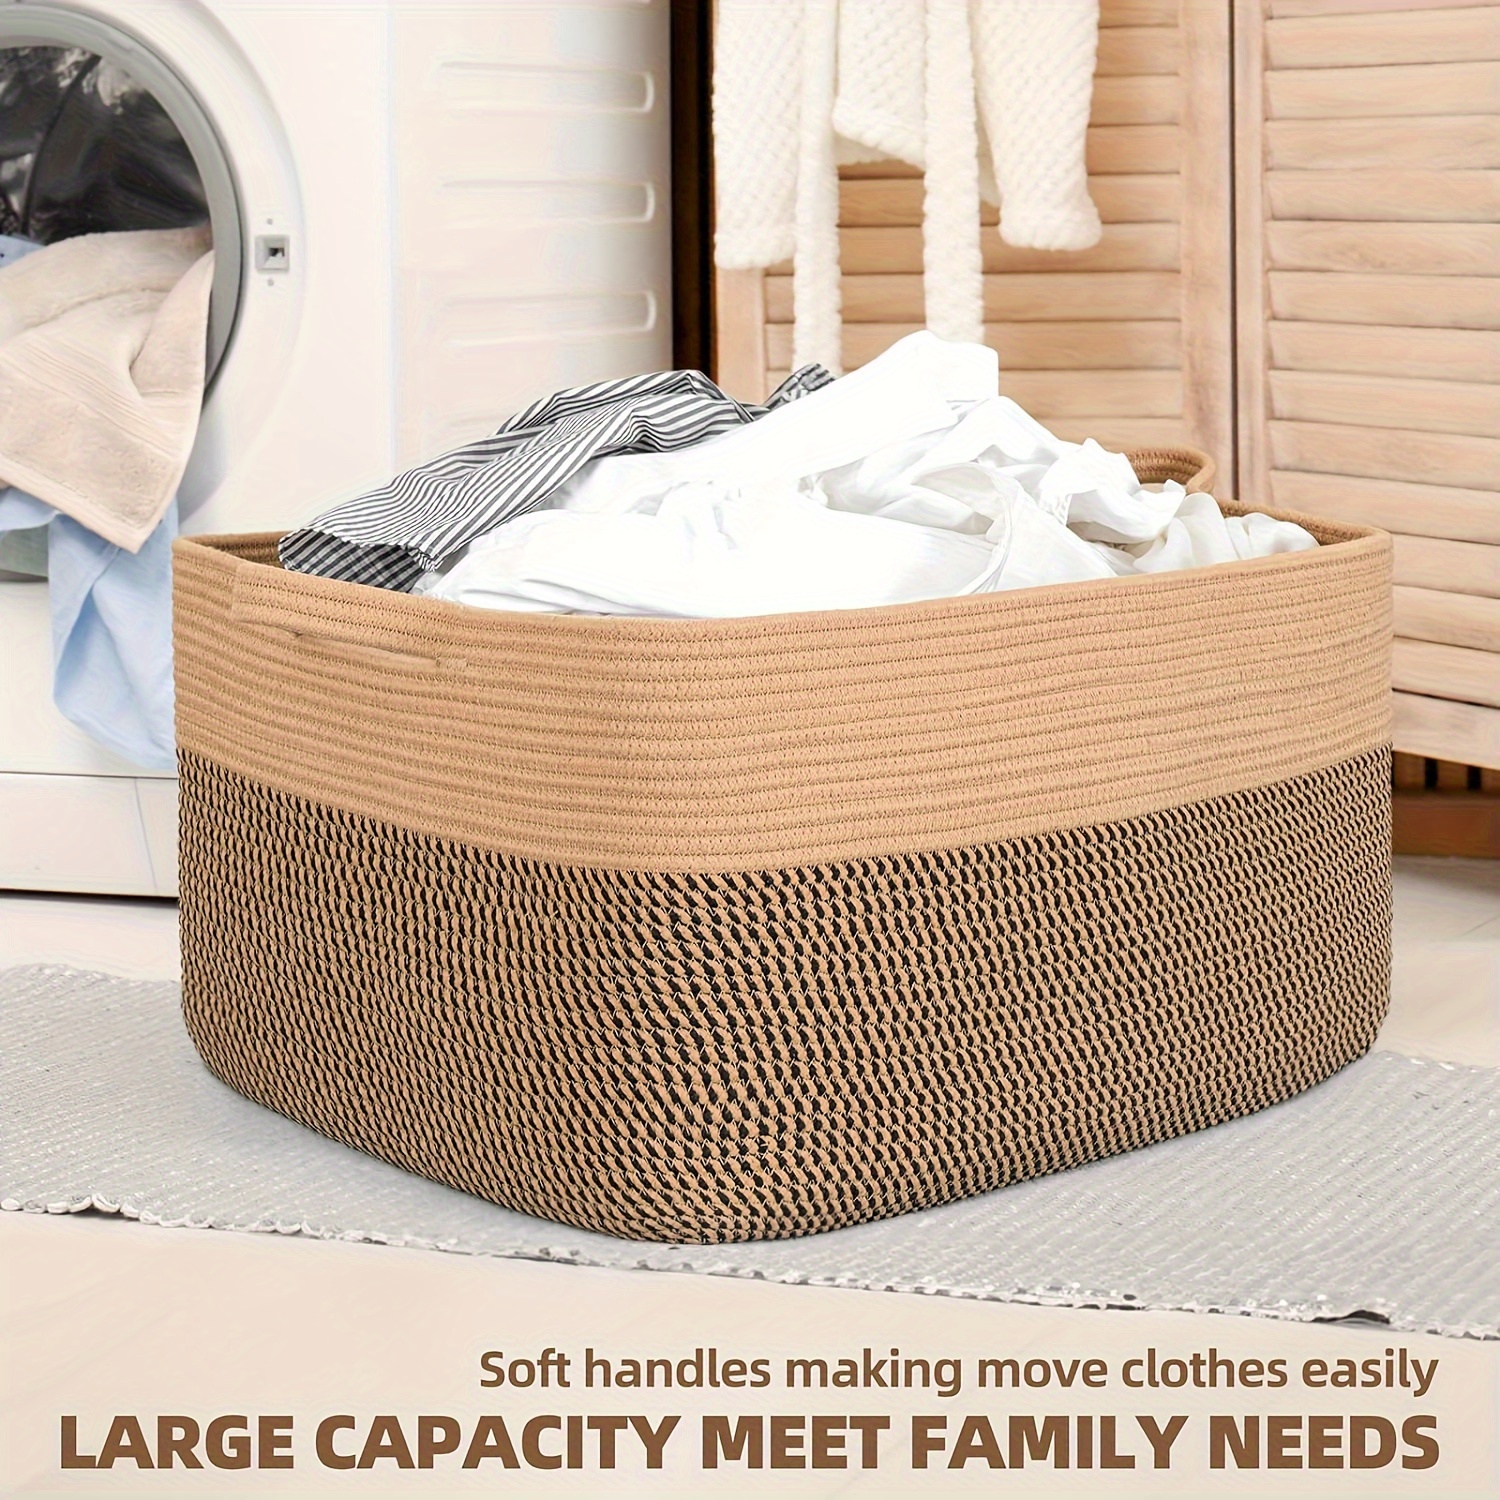 

1pc Large Toy Storage Basket, Toy Storage Bin, Woven Storage Basket With Handles For Laundry, Living Room, Bedroom, 18.9" X 13.4" X 11" Cubes Storage Bins For Closet, Laundry Basket, Blankets Basket